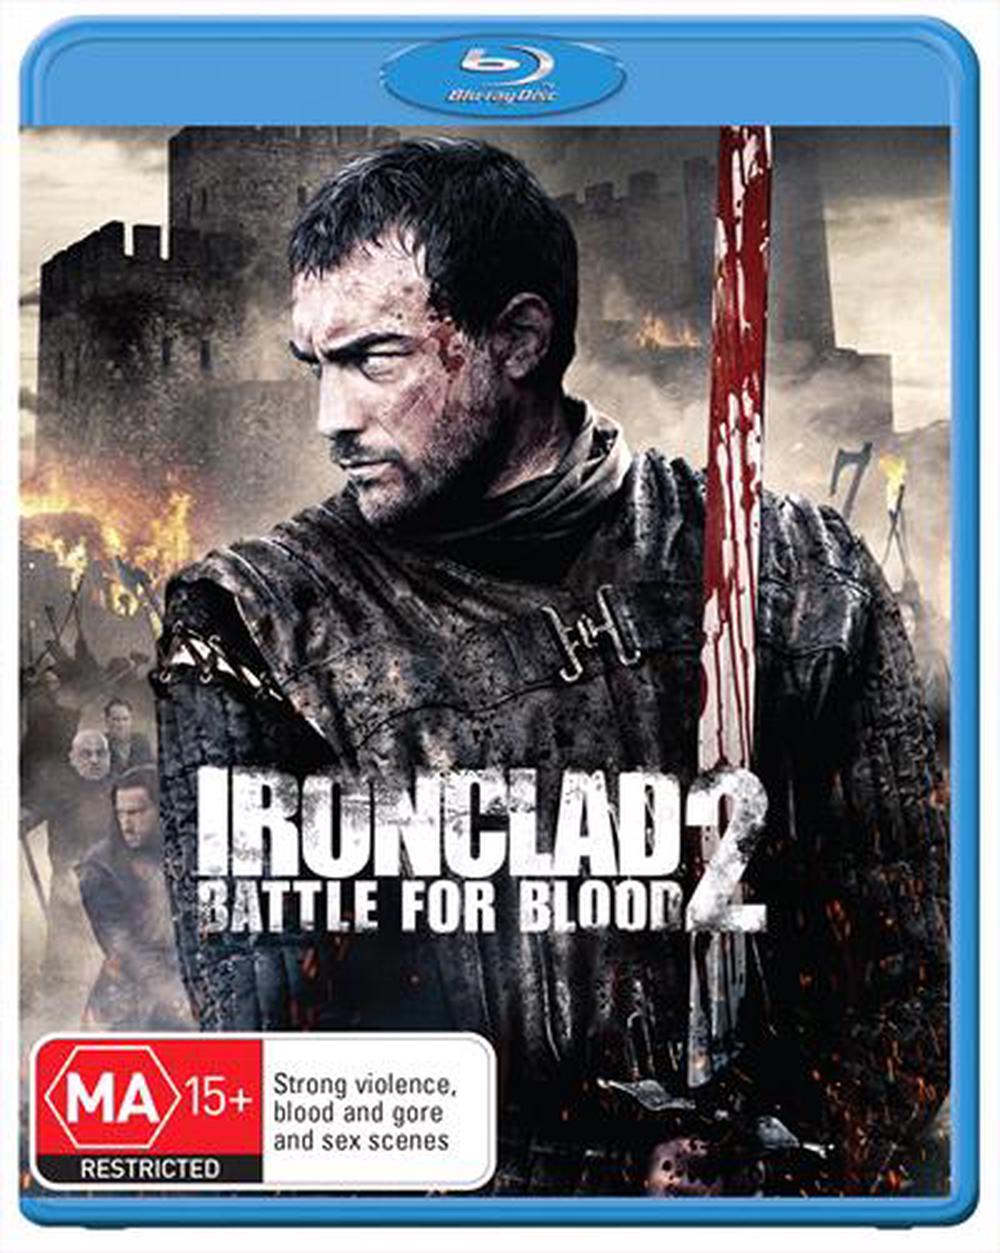 Ironclad / Ironclad 2 - Battle For Blood, Blu Ray | Buy online at The Nile